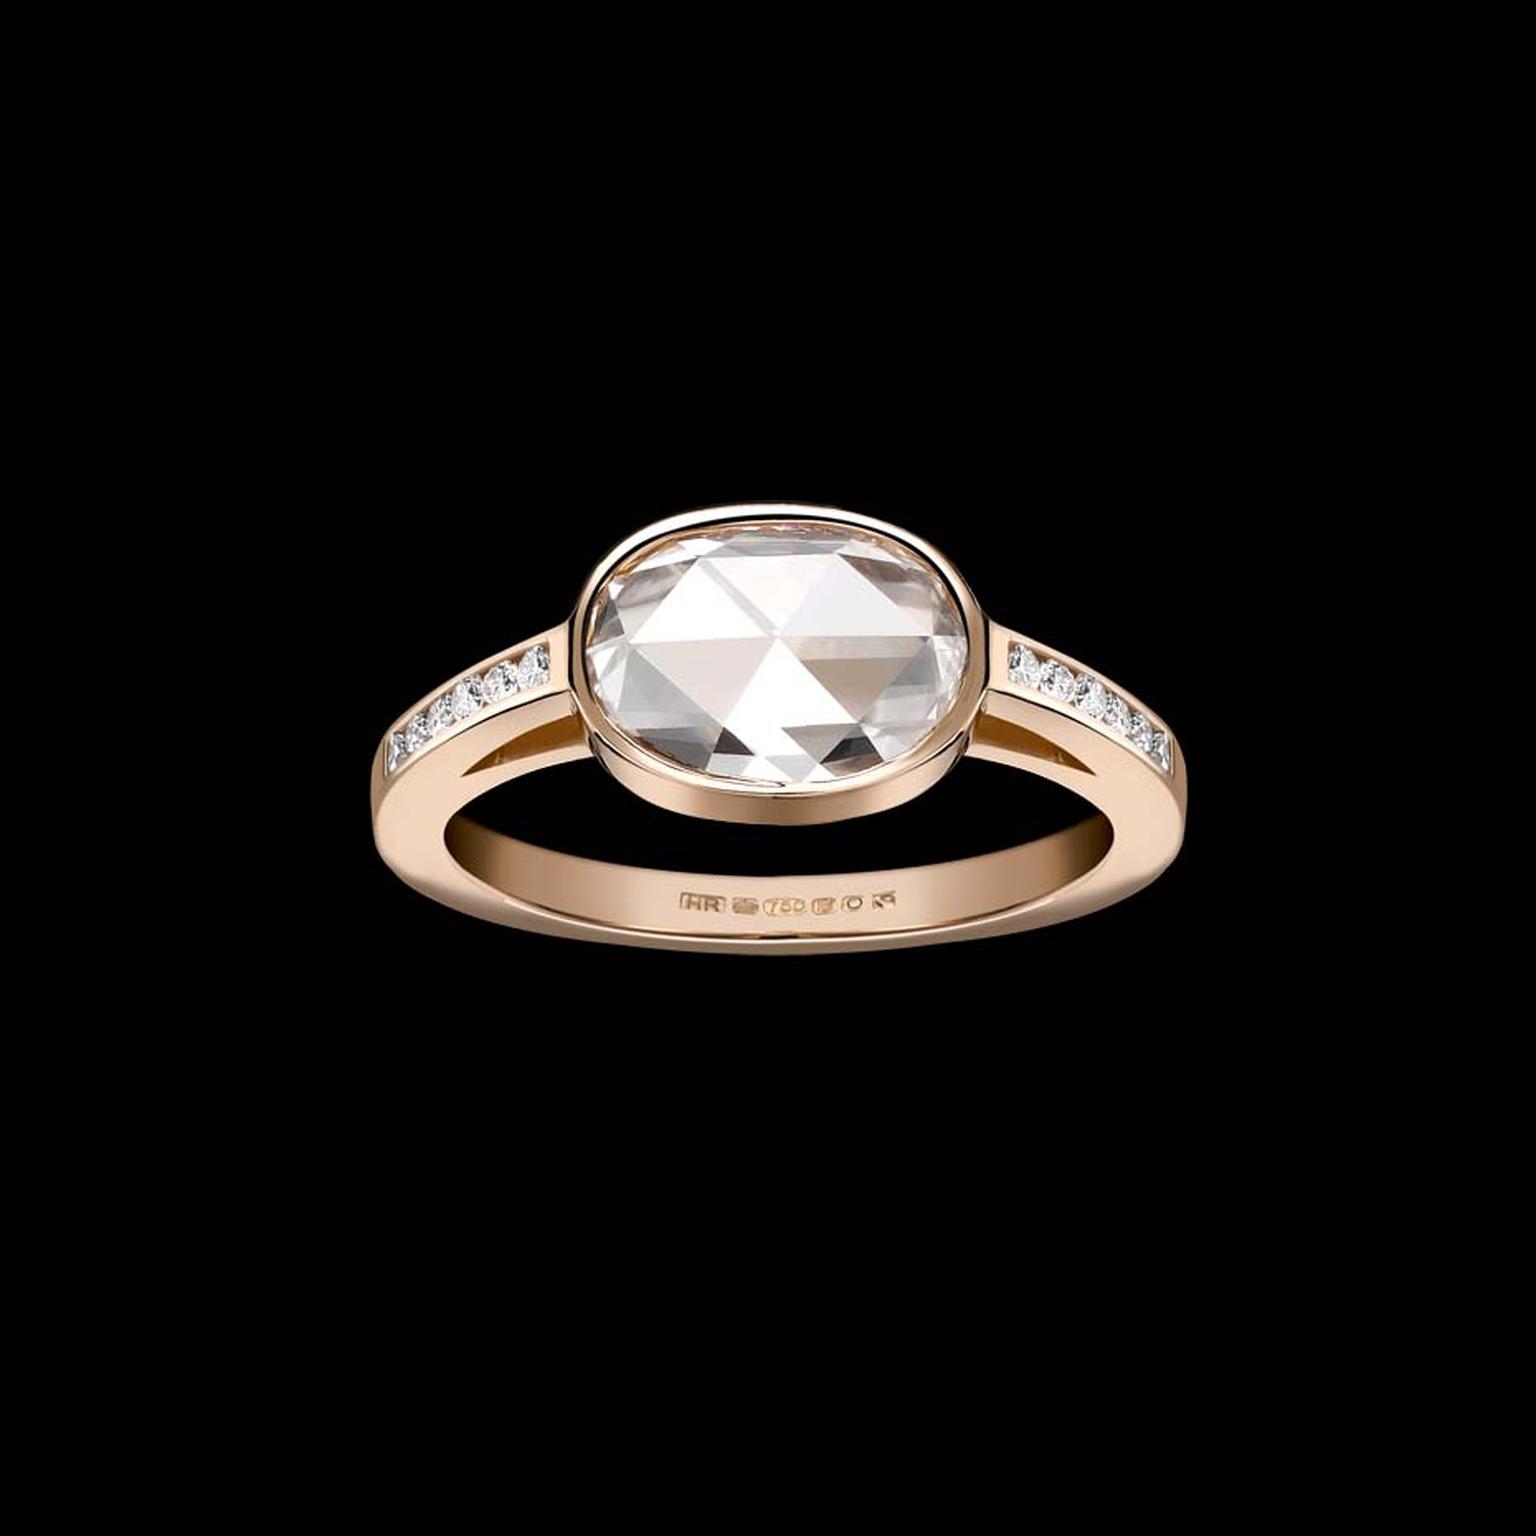 Hattie Rickards rose-cut diamond engagement ring, a bespoke creation in stamped Fairmined and Fairtrade gold.